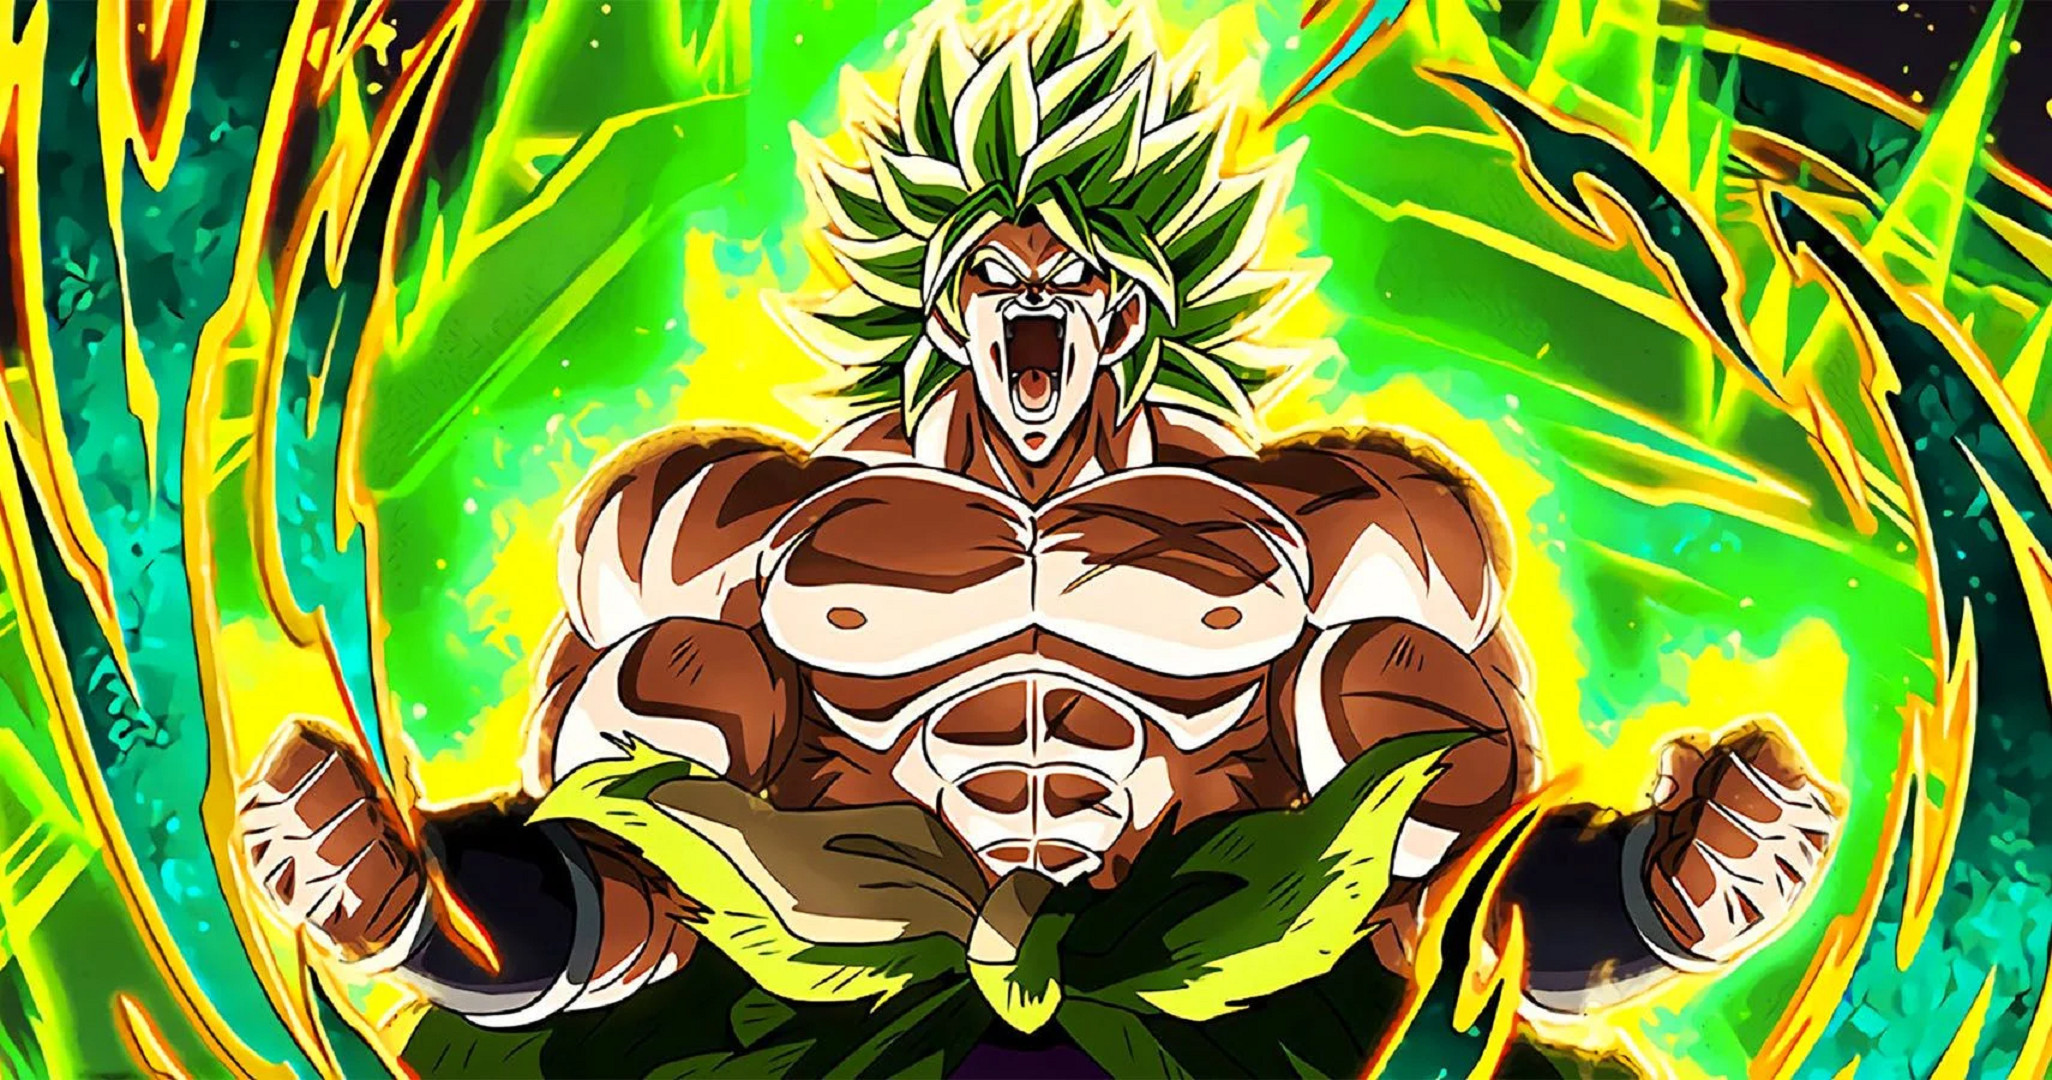 Understand why Broly no longer has the Saiyan tail in Dragon Ball Super